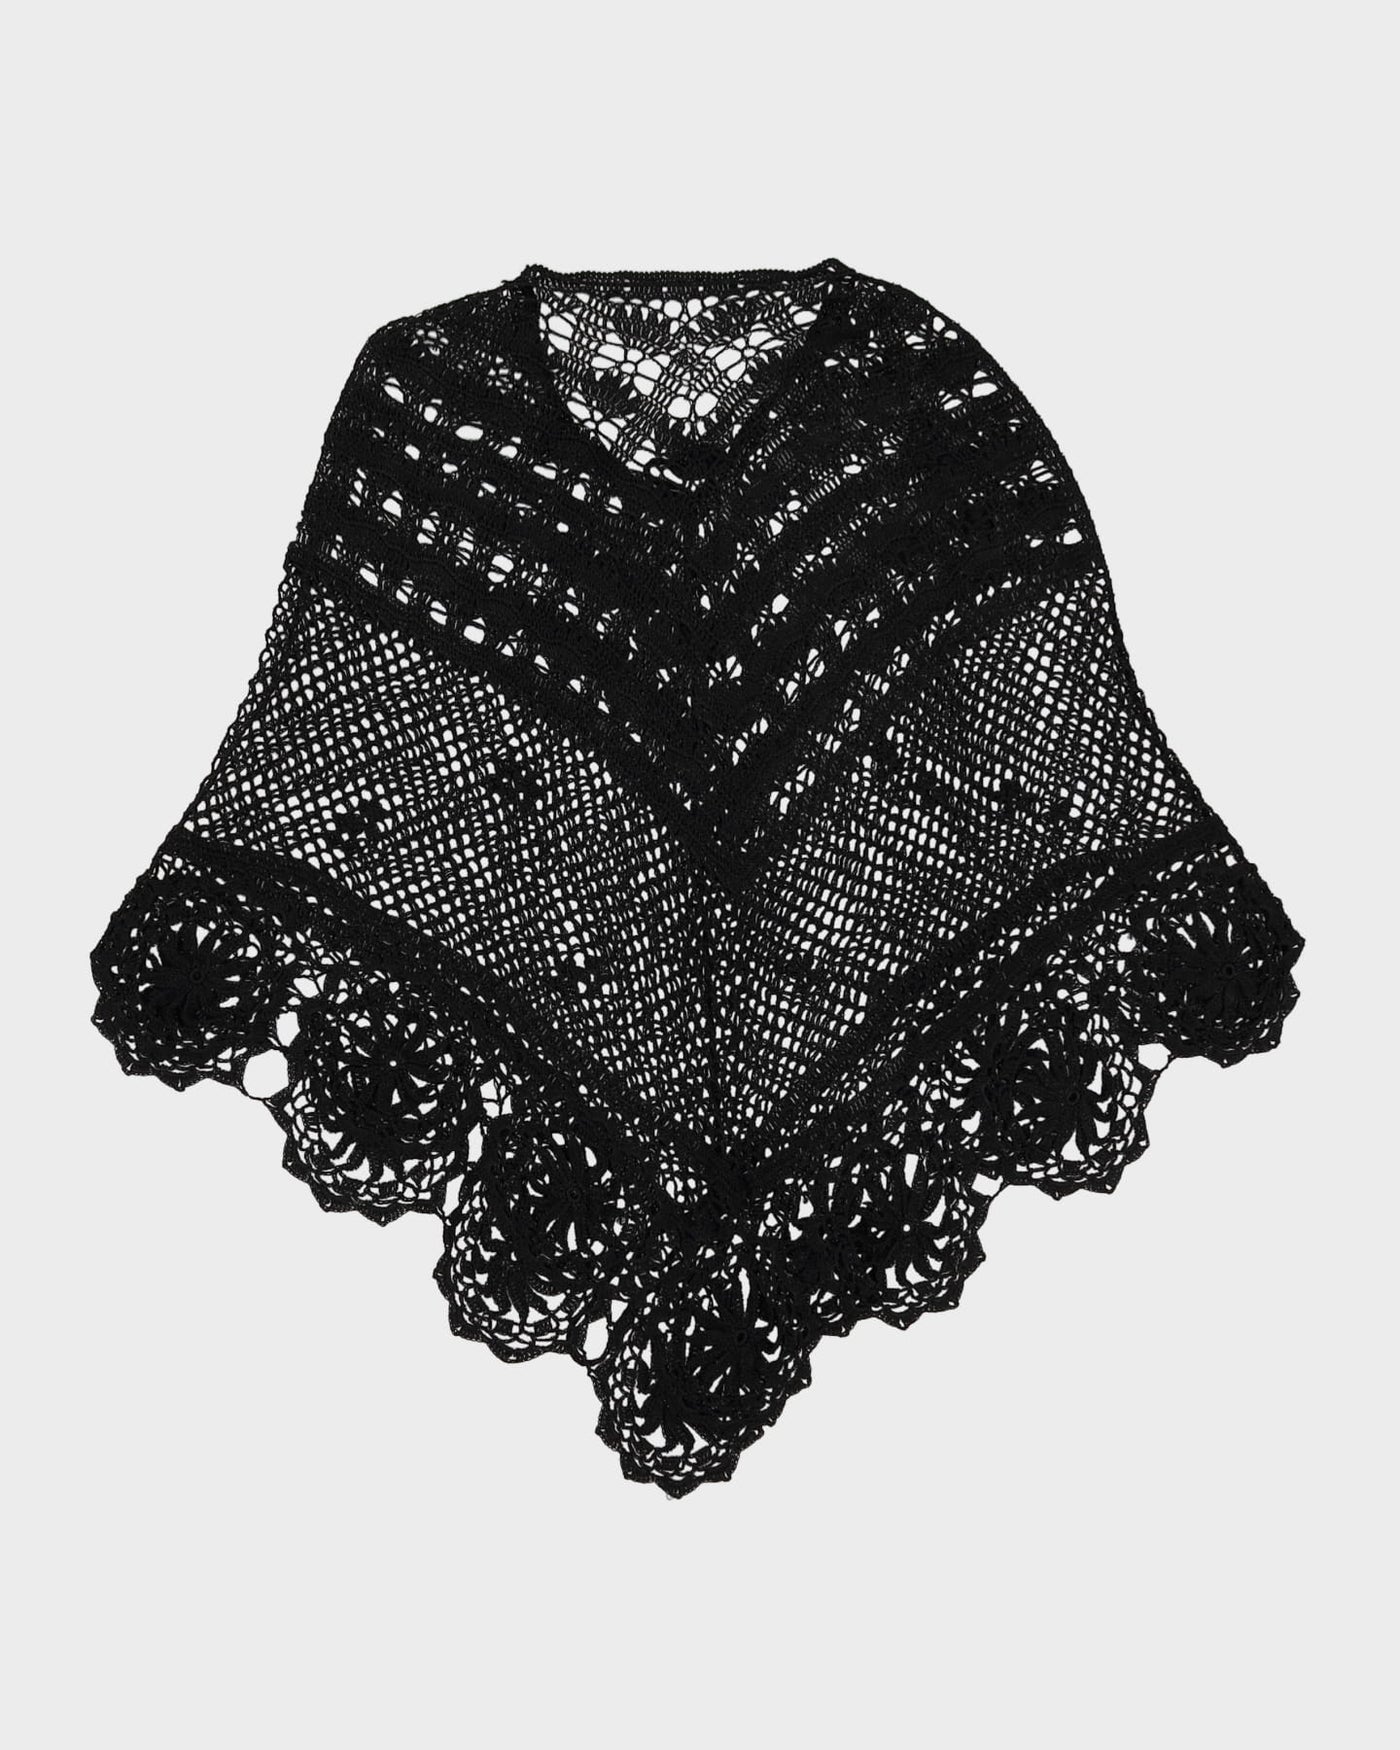 Hand Crocheted Black Lace Cape - S